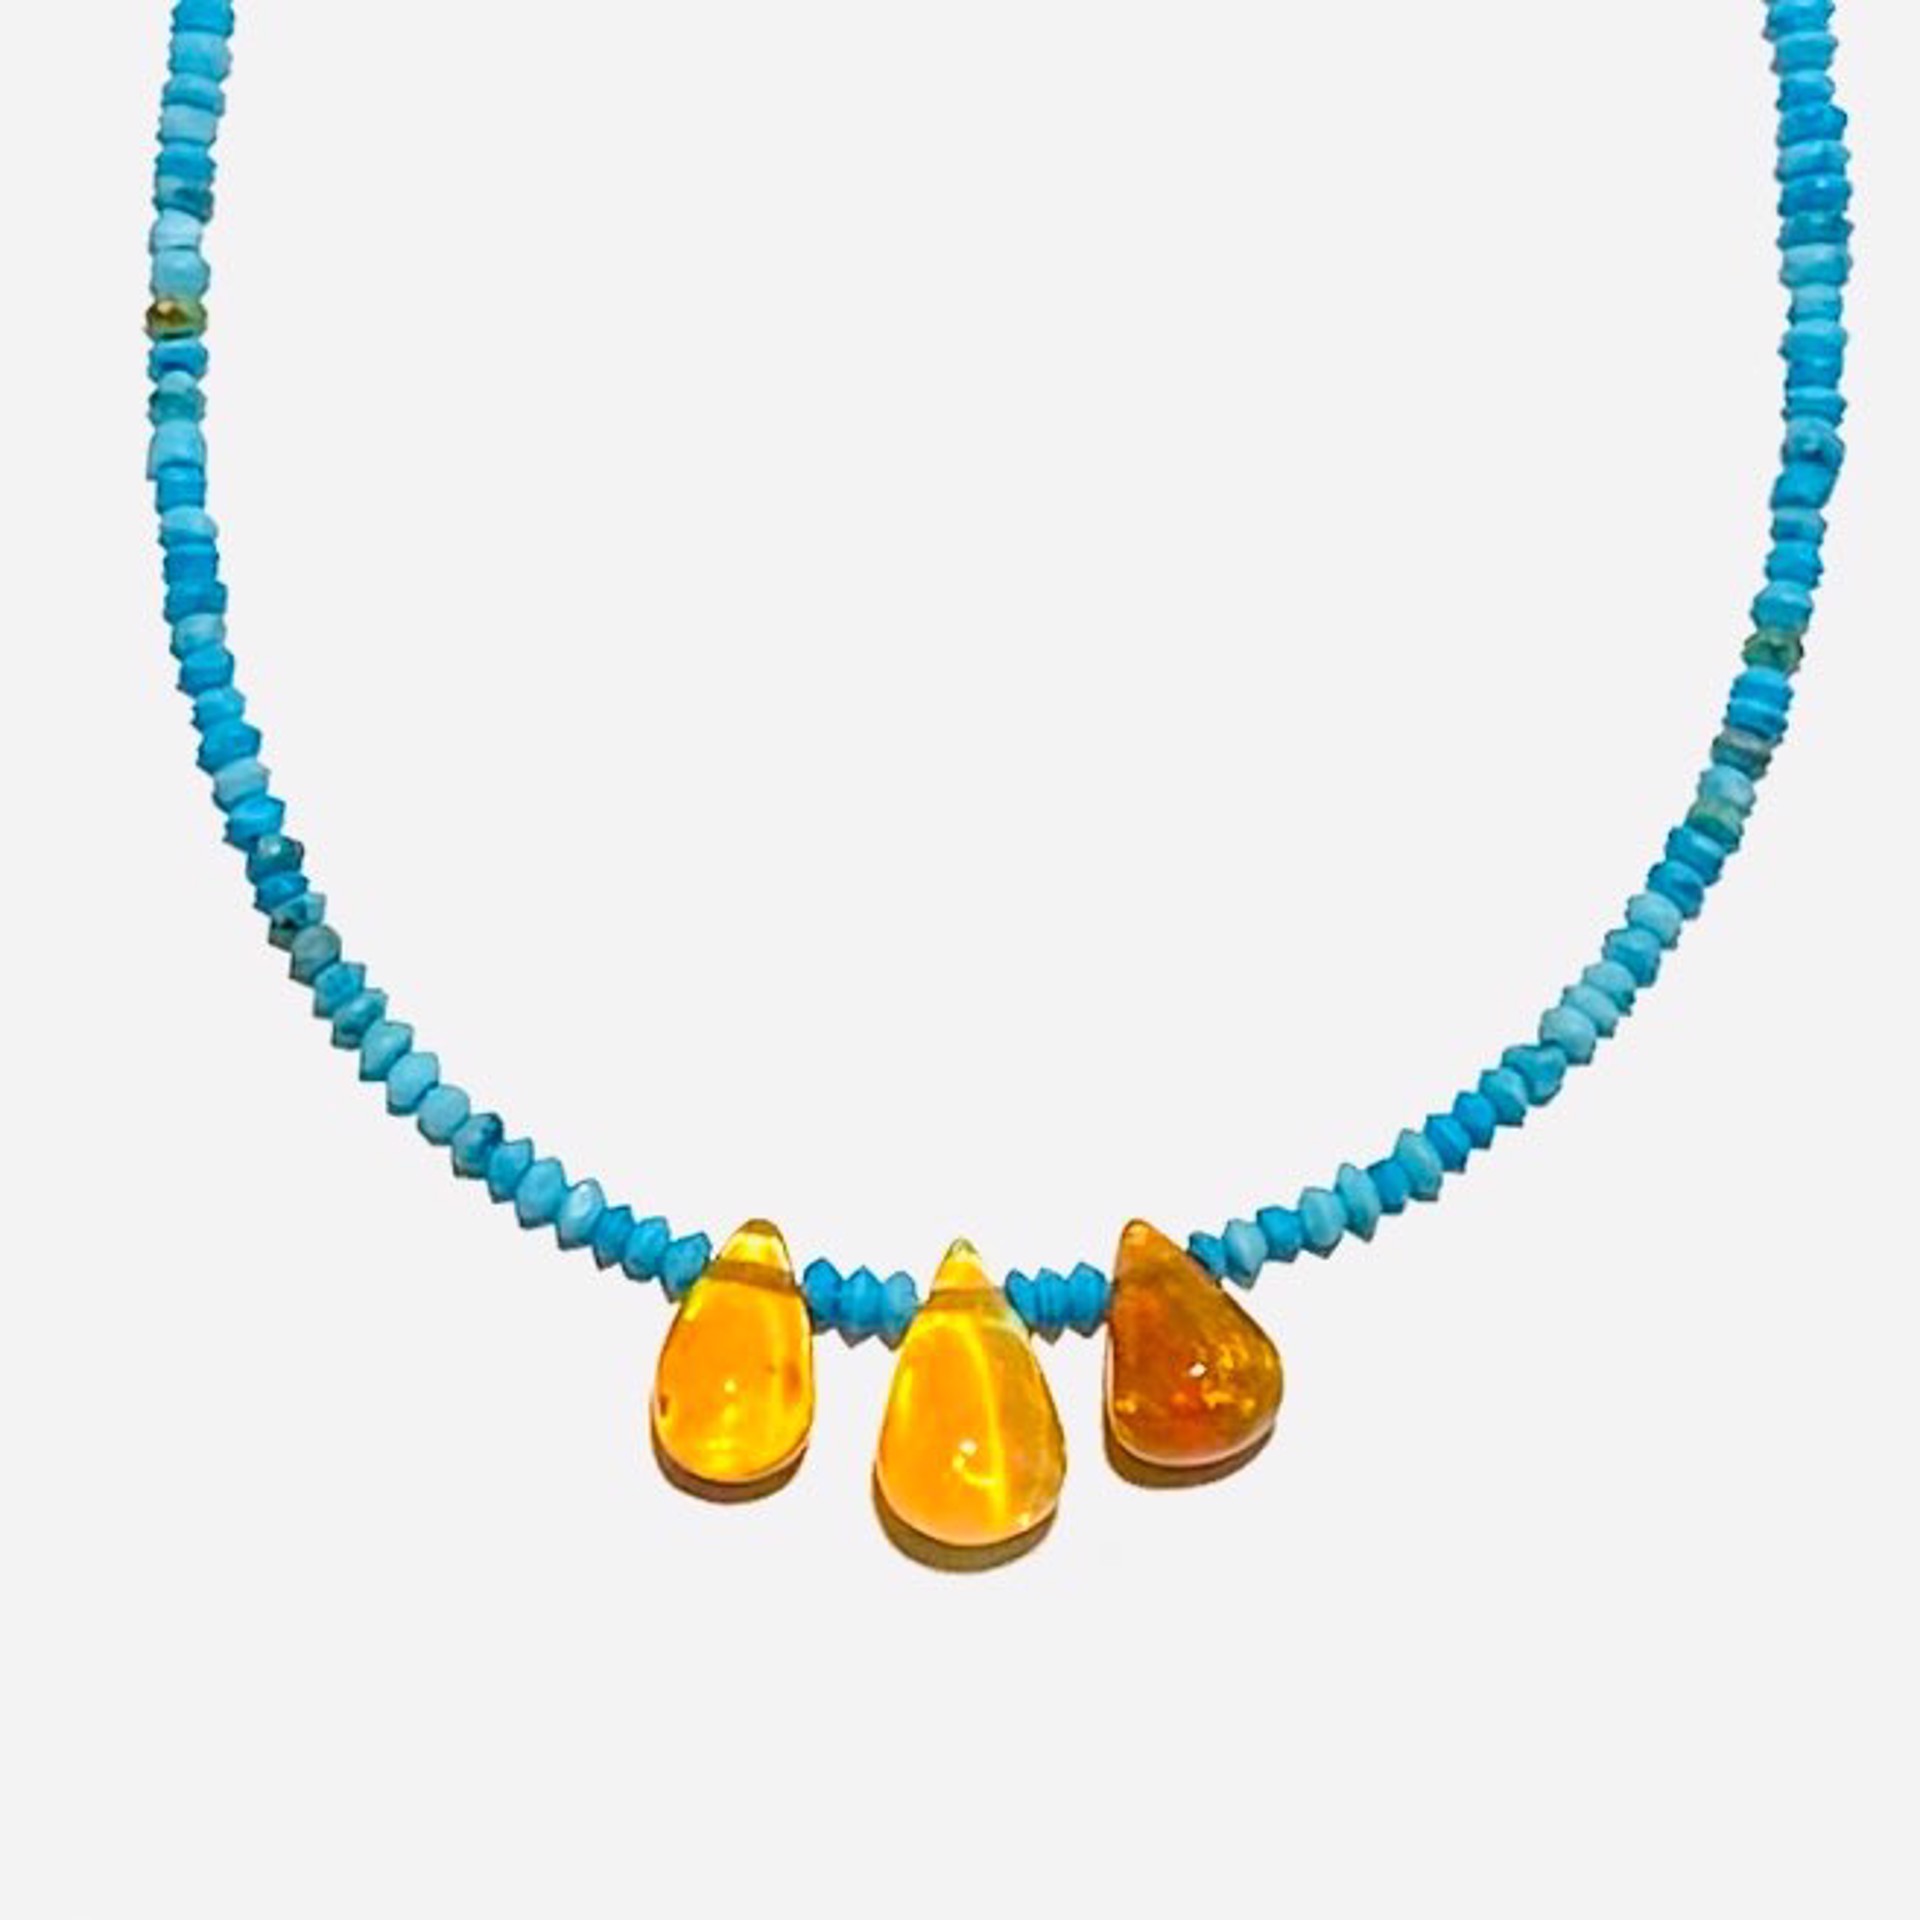 Tiny Turquoise, Three Ethiopian Opal Brios Necklace NT23-86 by Nance Trueworthy